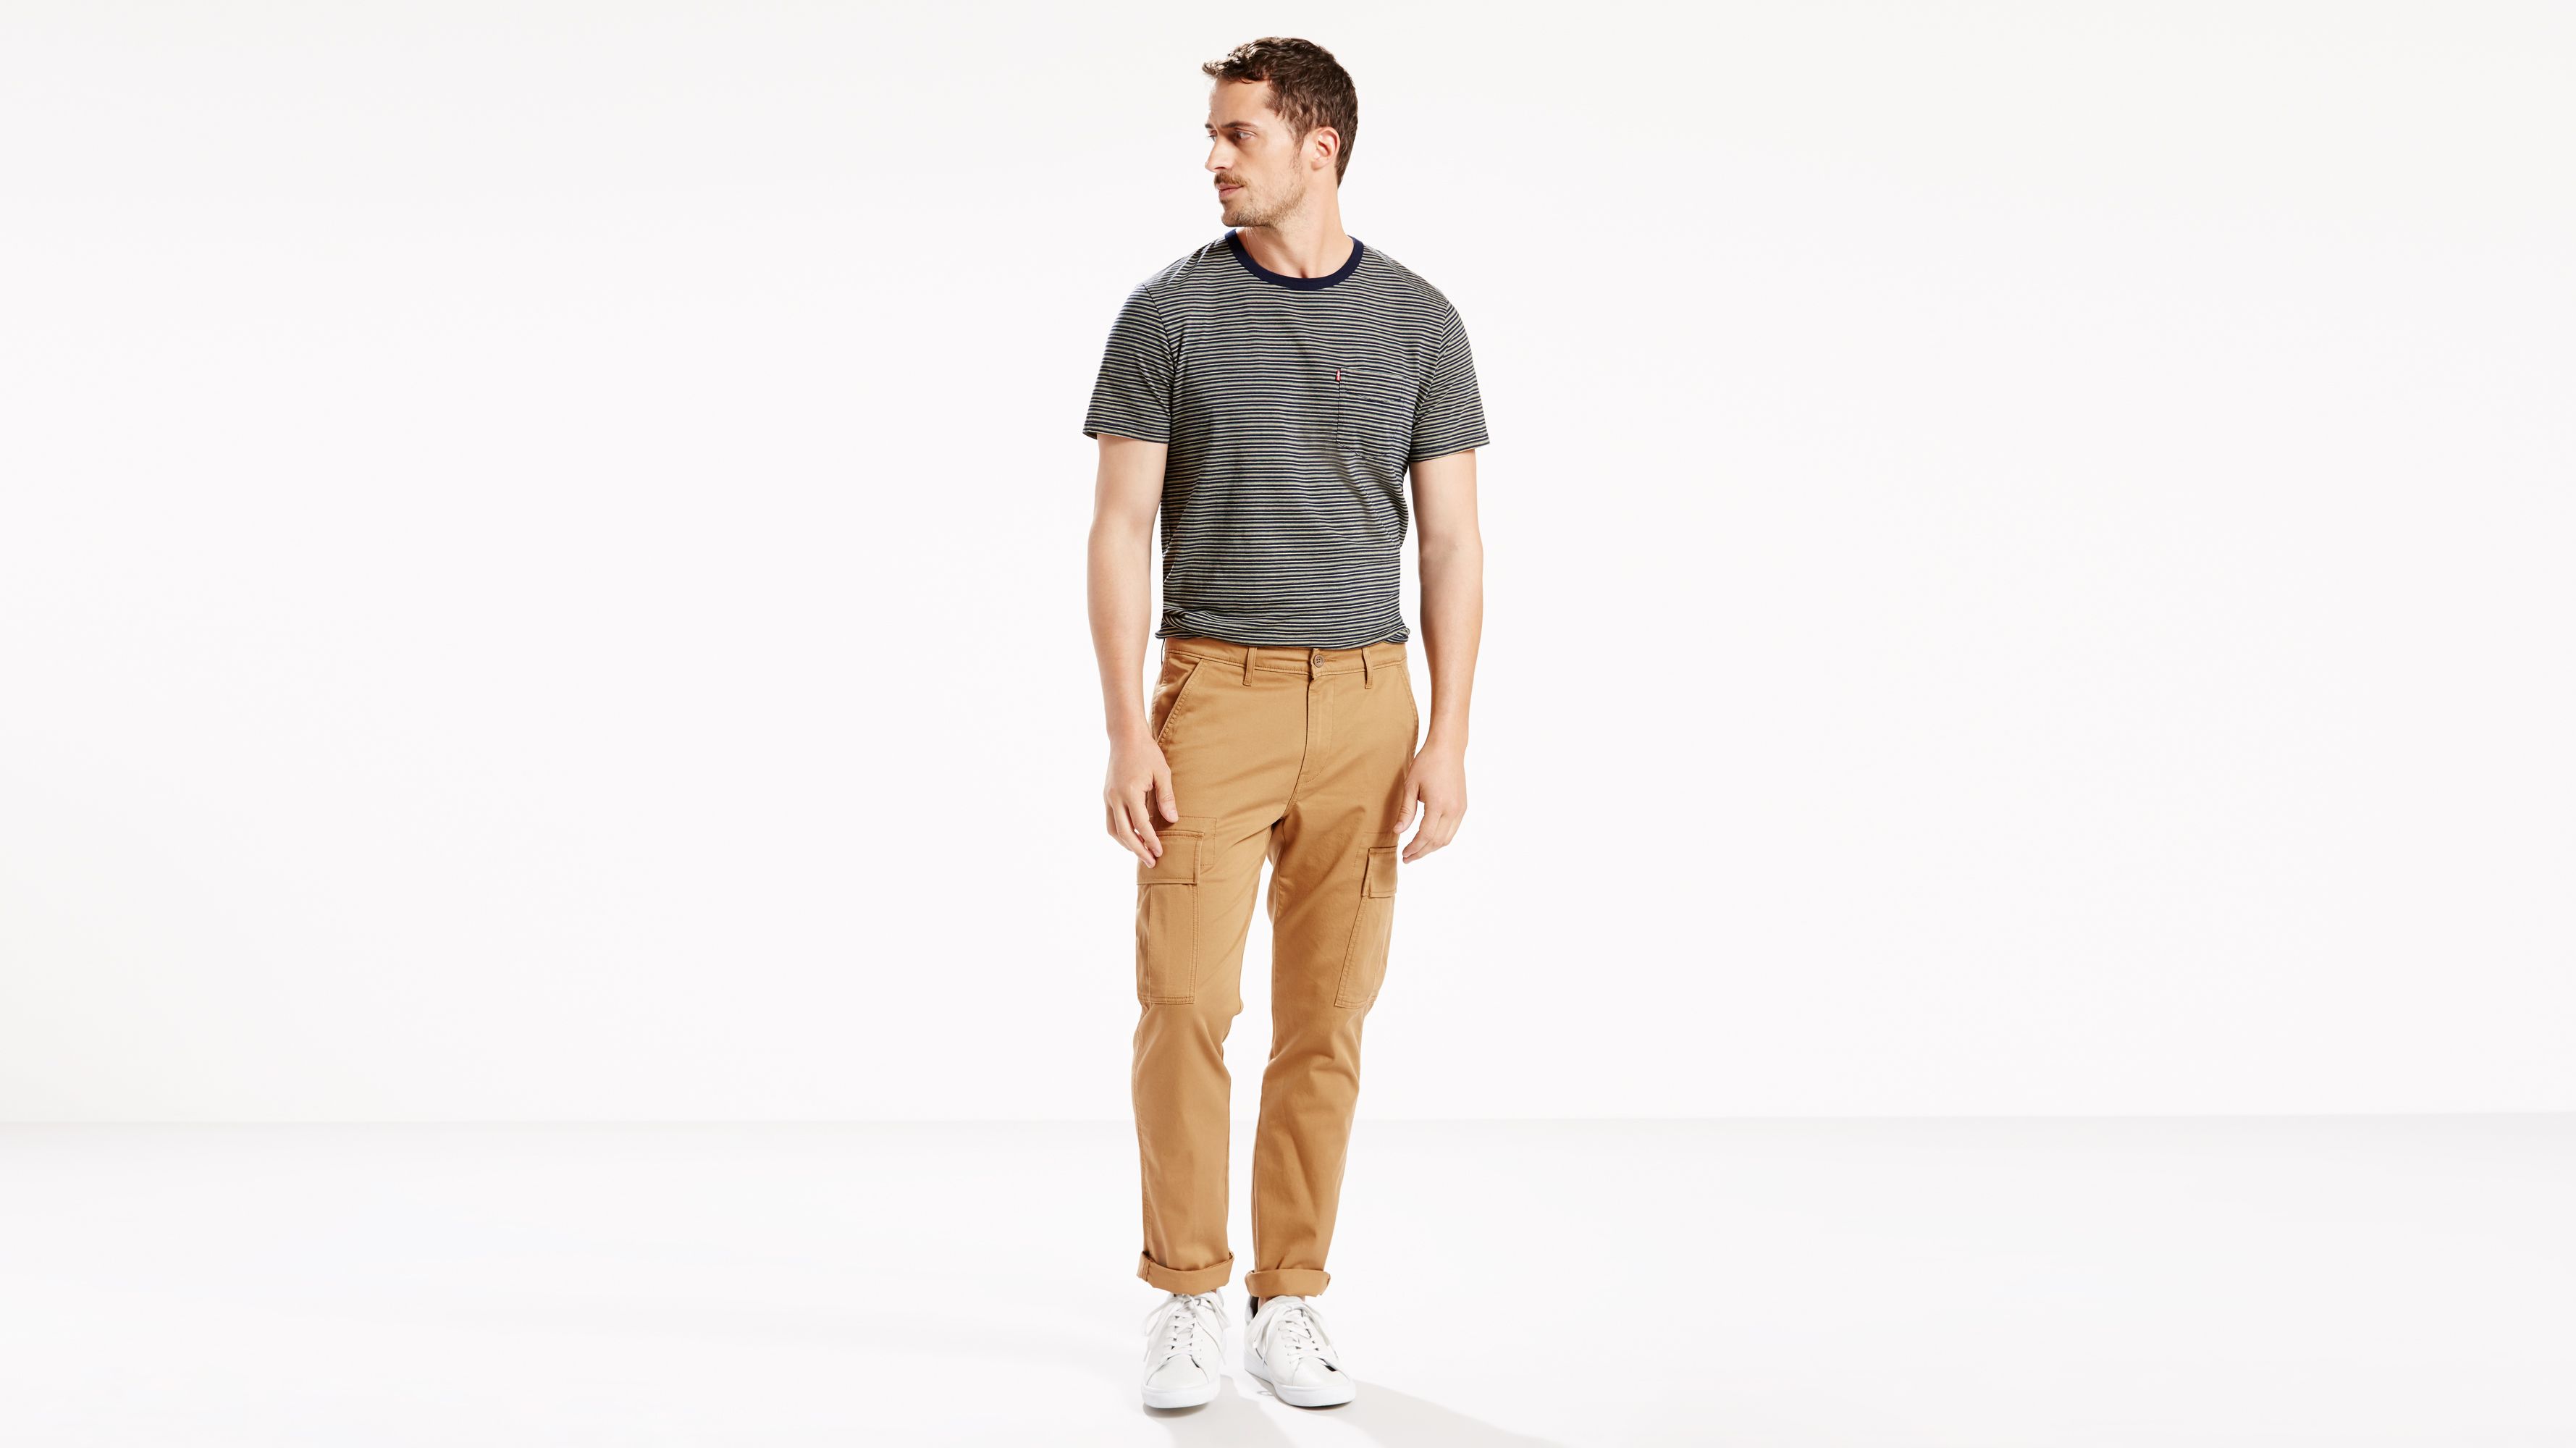 levi's big and tall cargo pants